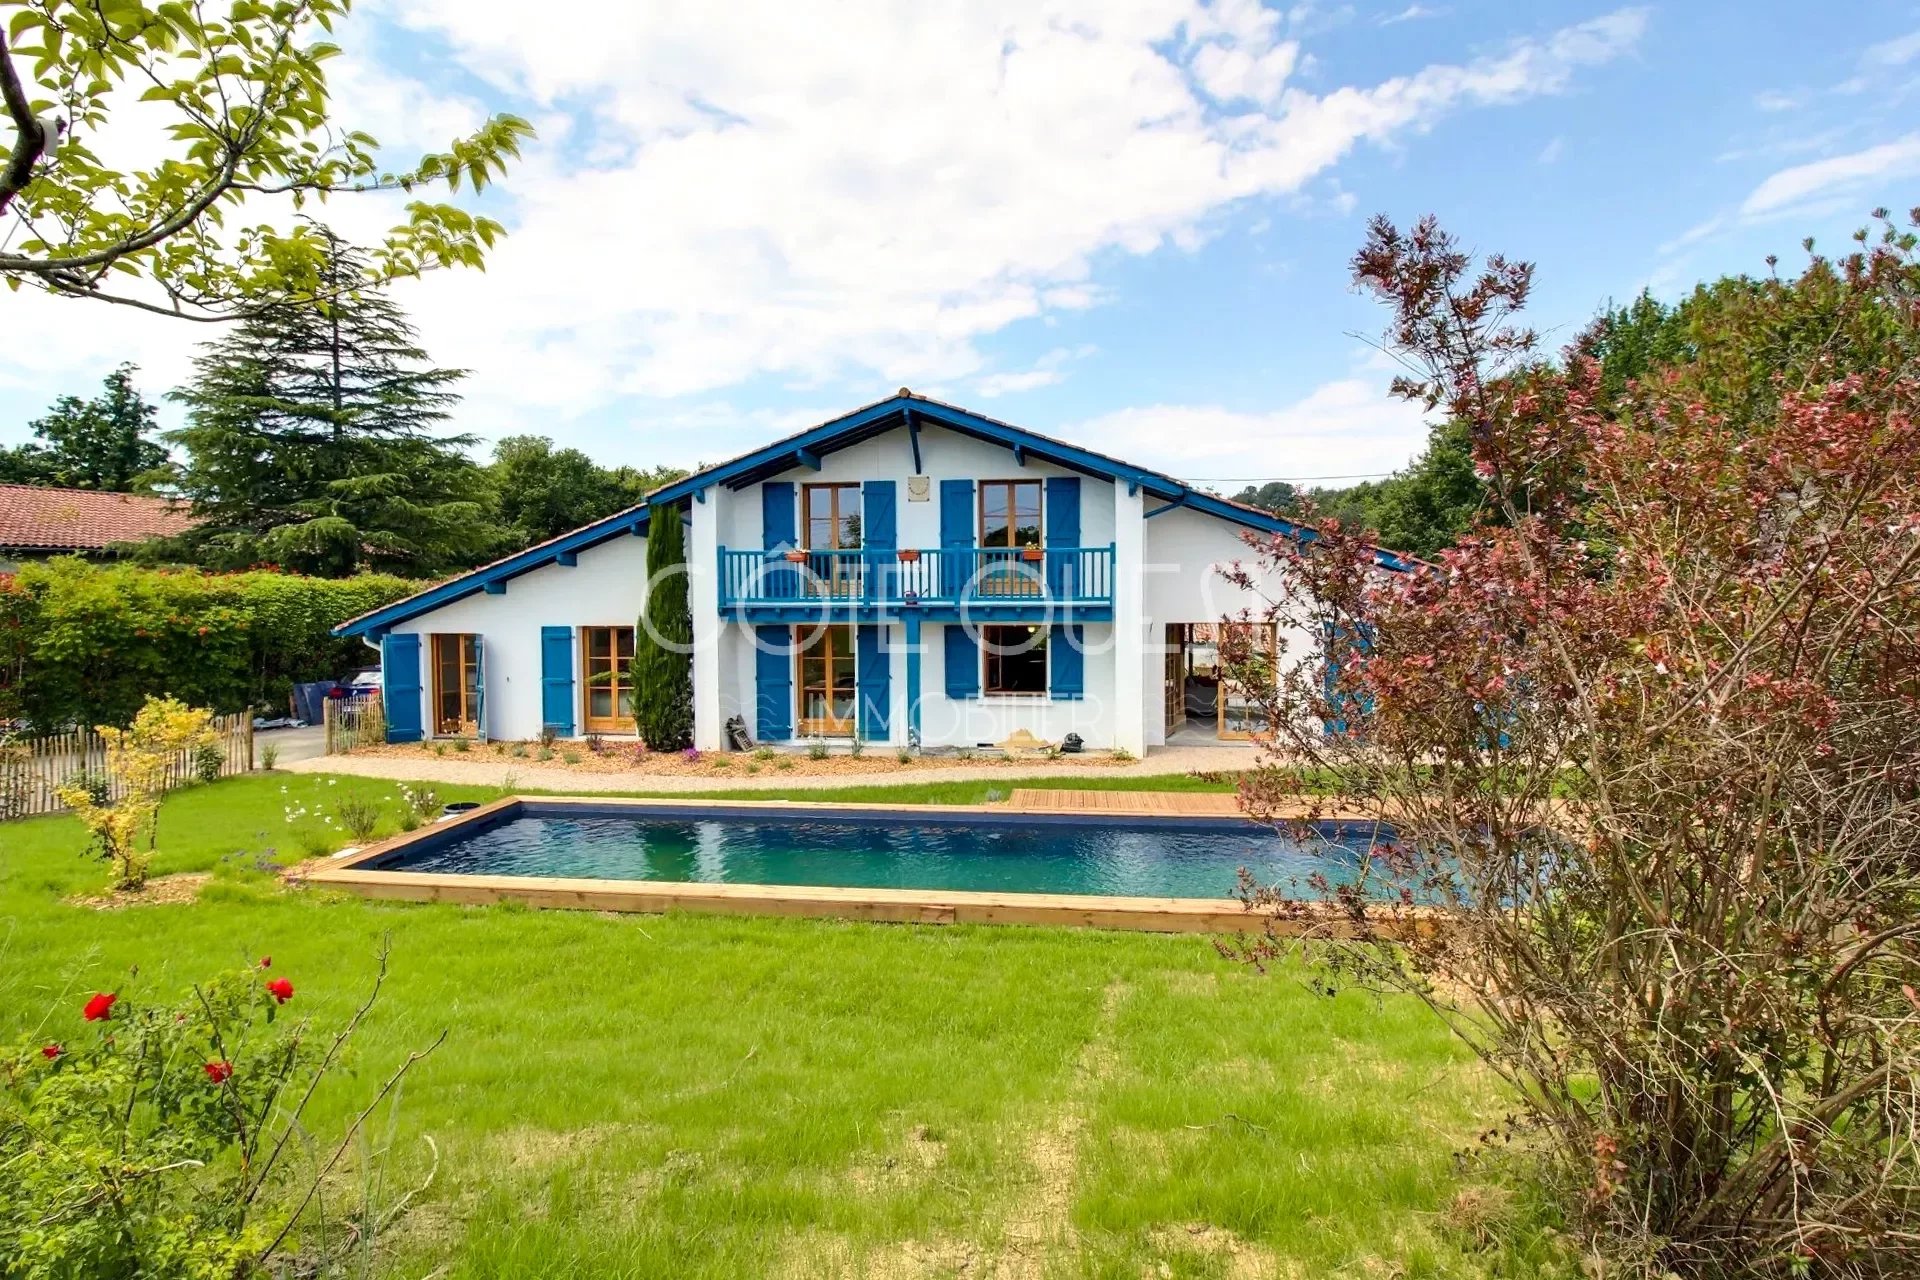 ARCANGUES, NEAR BIARRITZ  -  A RENOVATED 5-BED PROPERTY